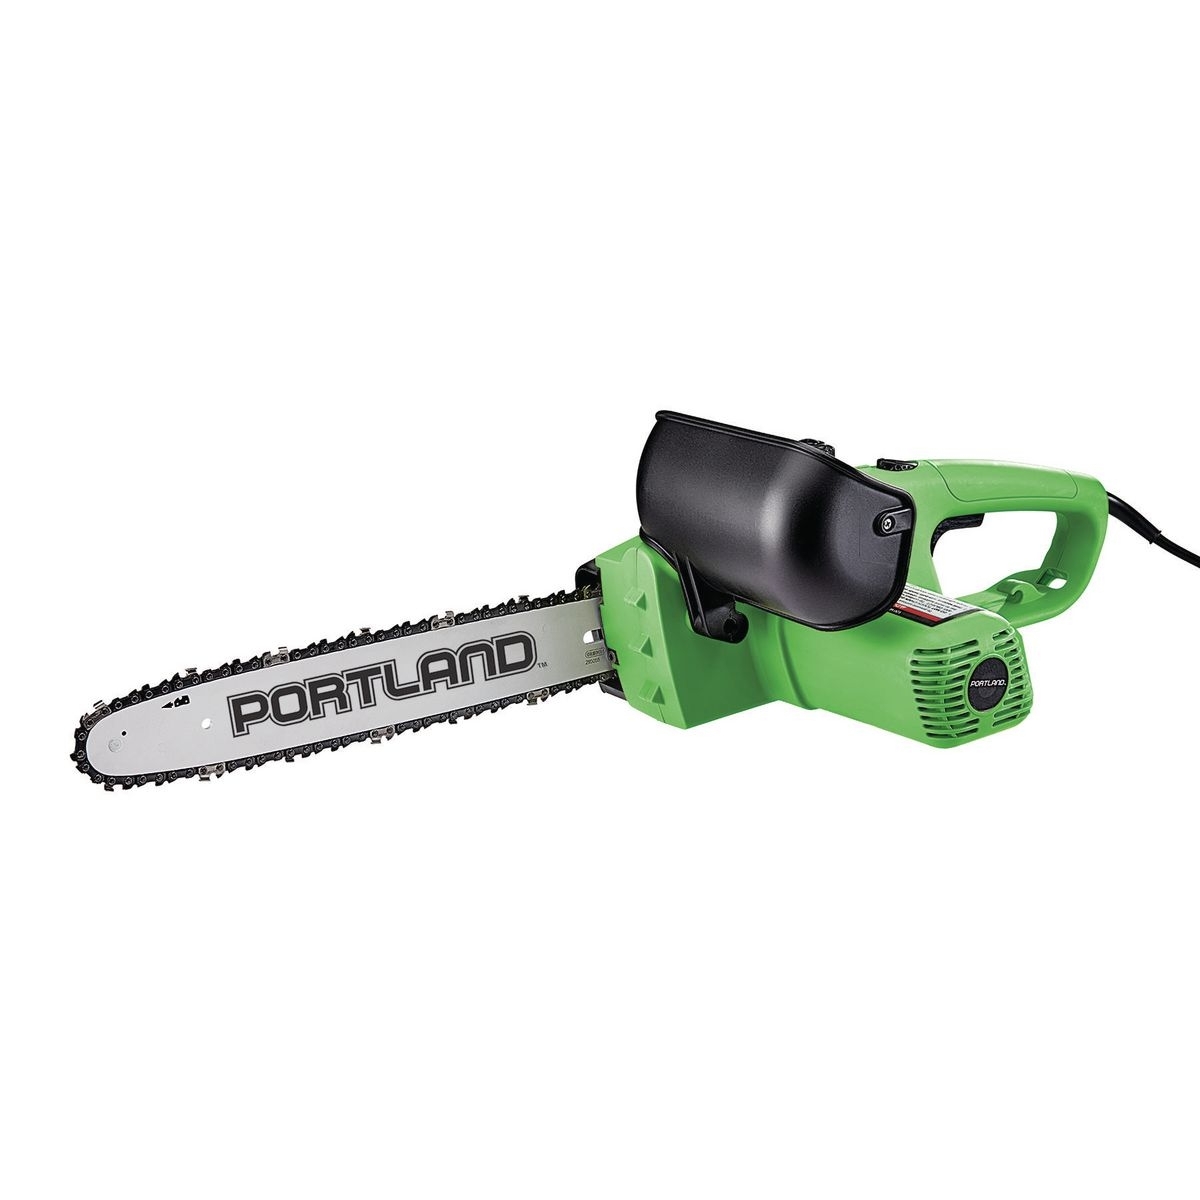 Portland corded 9 amp electric chainsaw